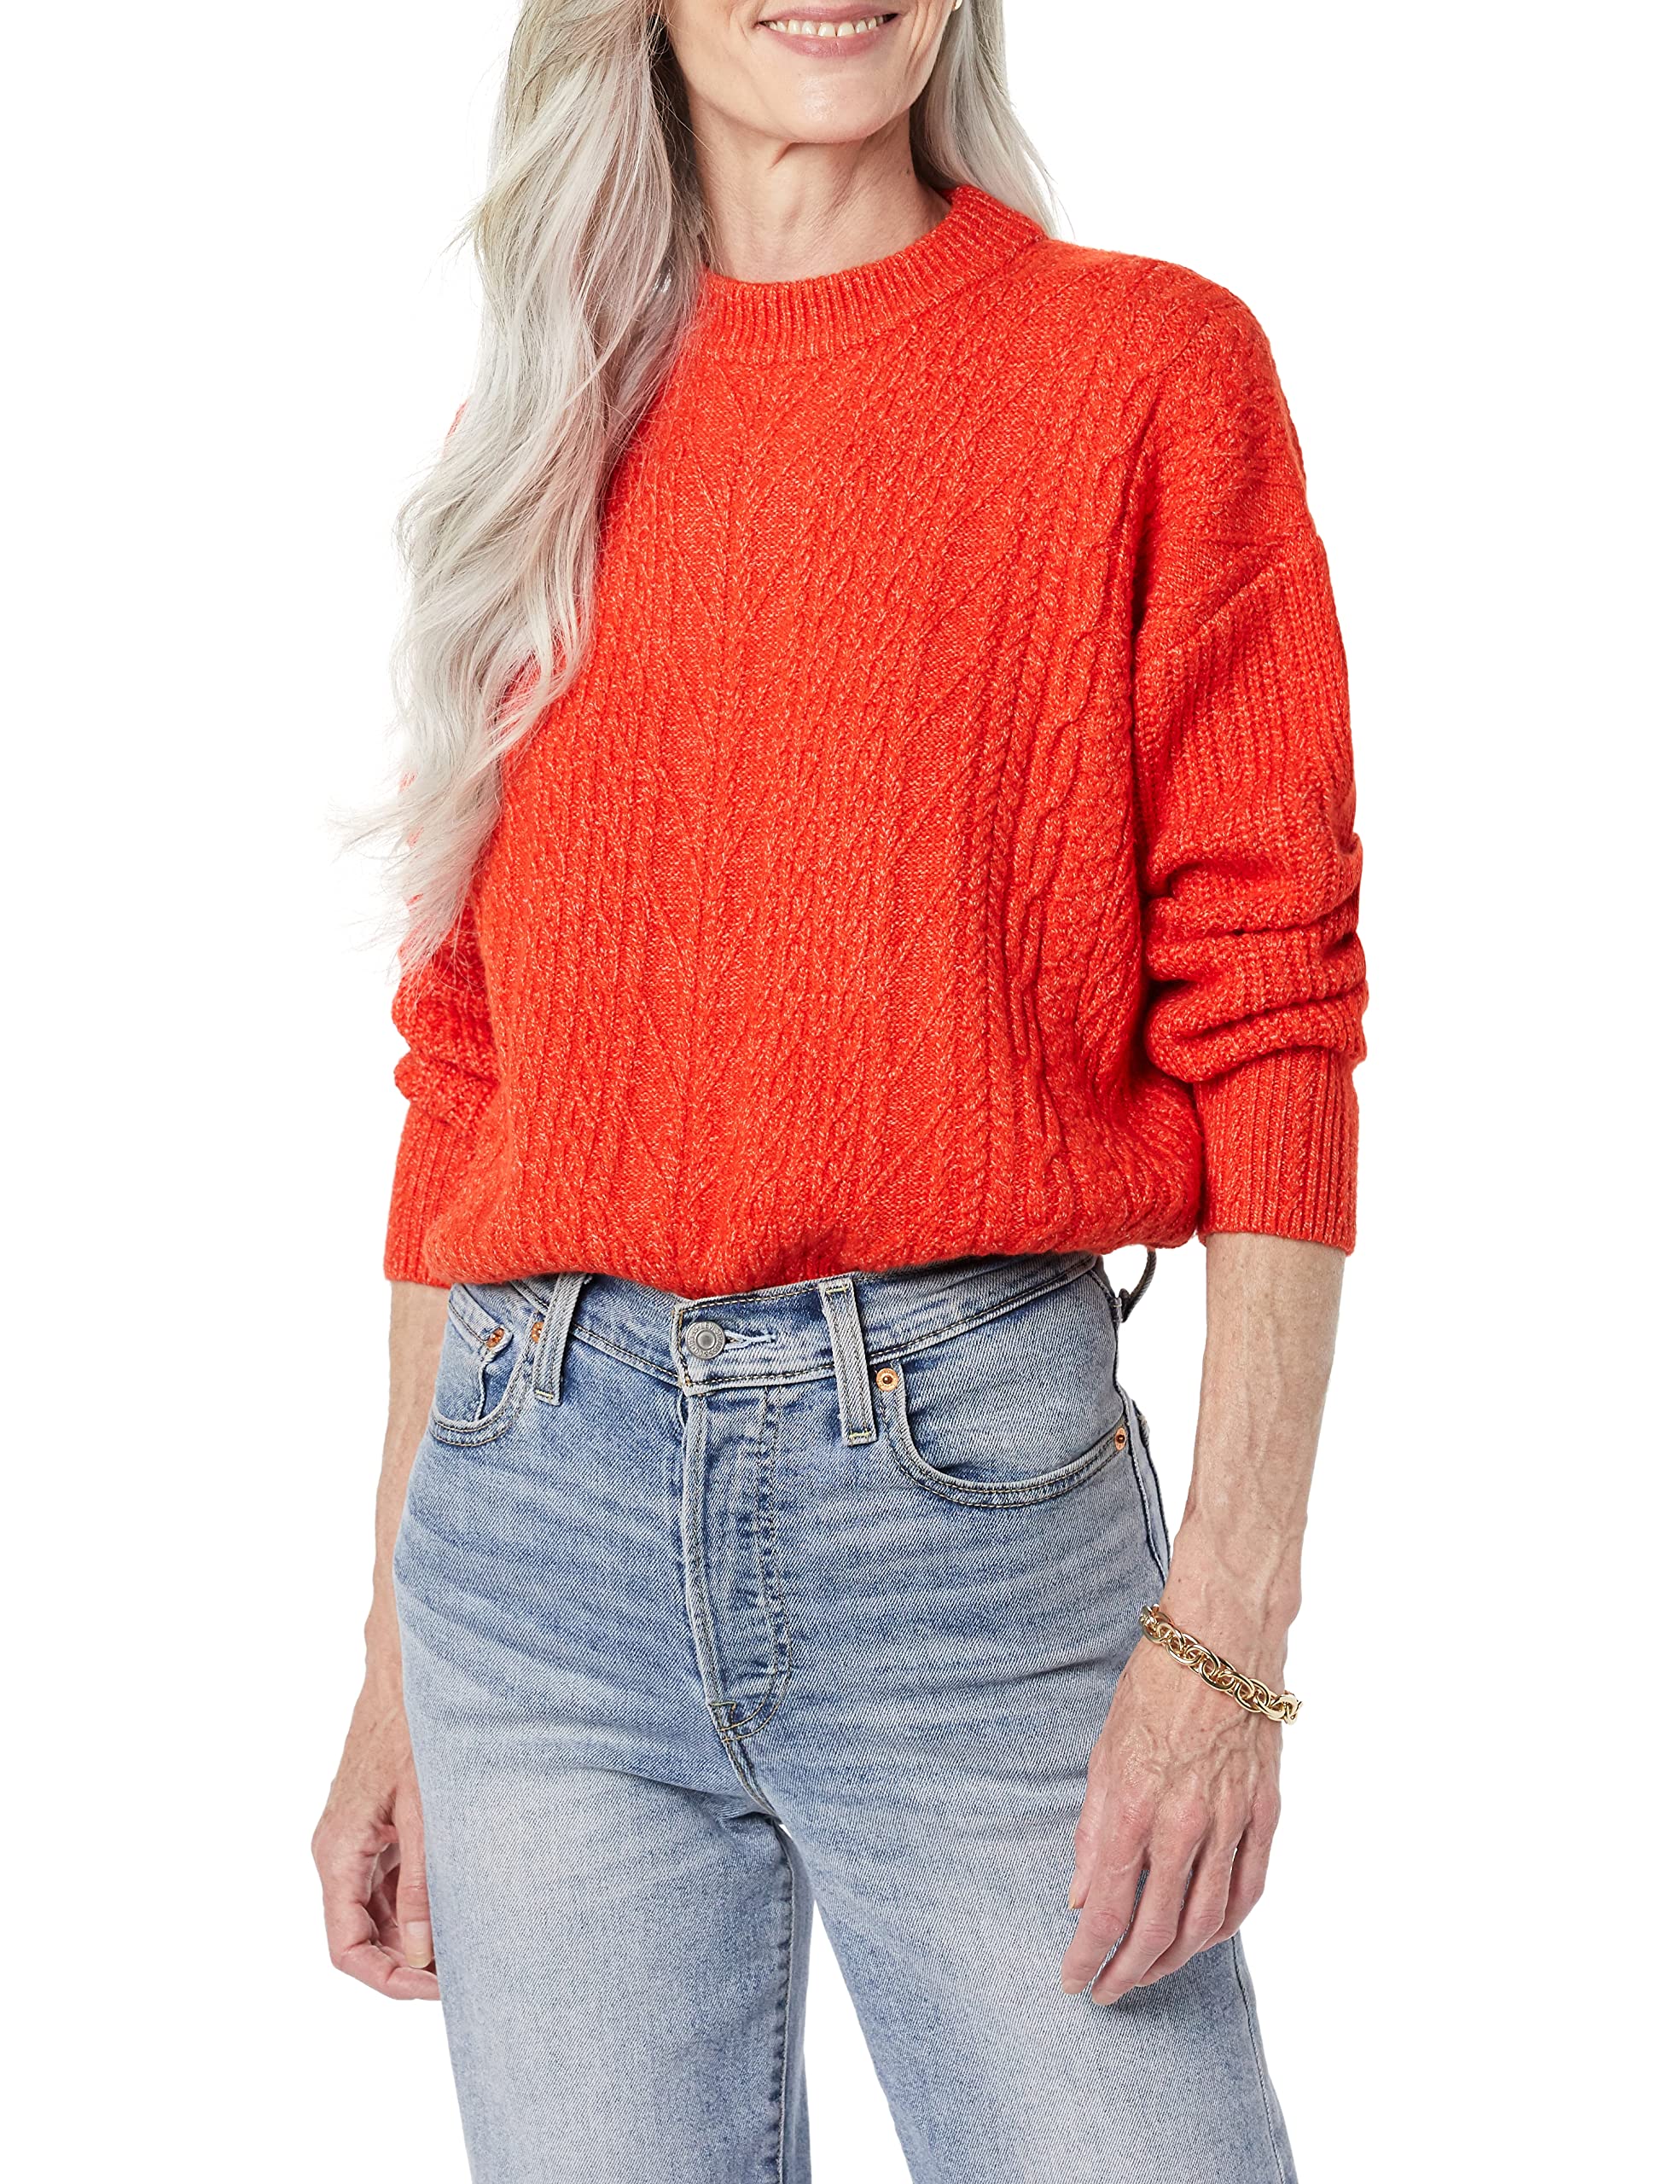 Amazon Essentials Women's Soft-Touch Modern Cable Crewneck Sweater (Available in Plus Size) - $9.70